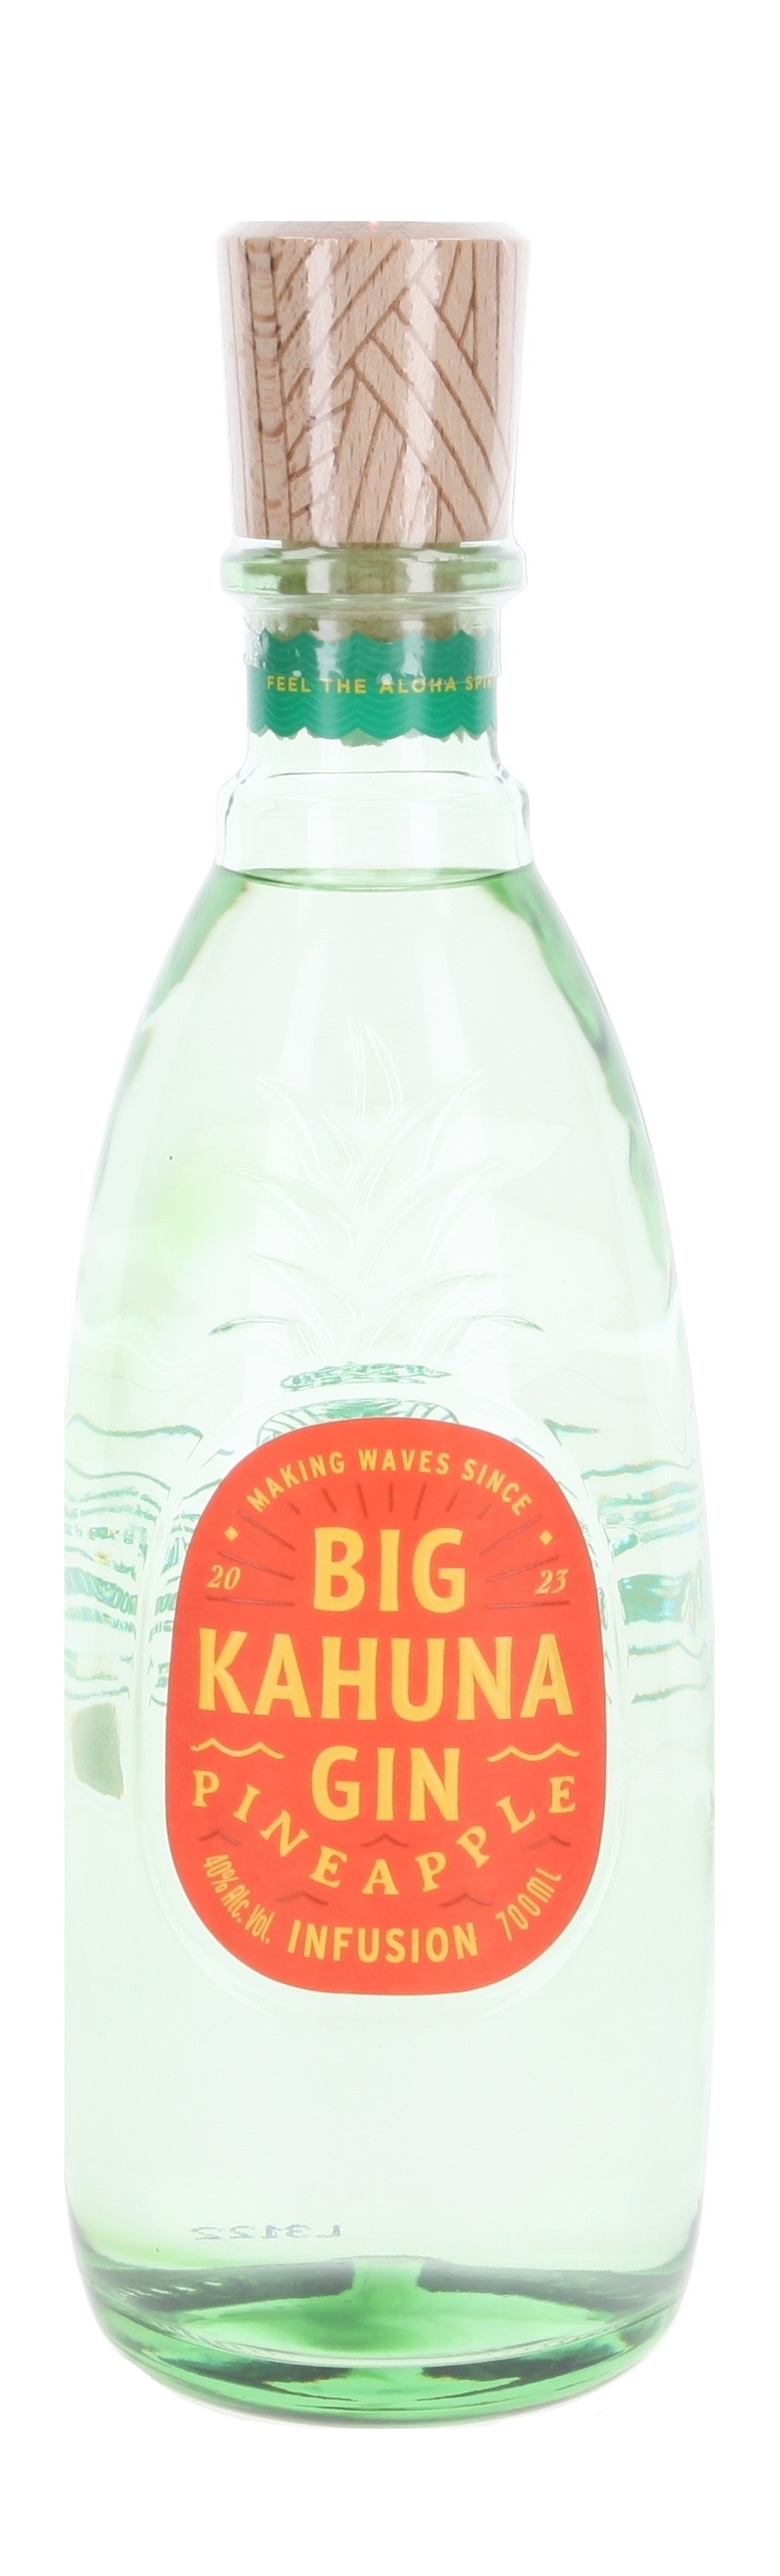 Big Kahuna Gin Pineapple Infusion online » the | To store Whisky.de